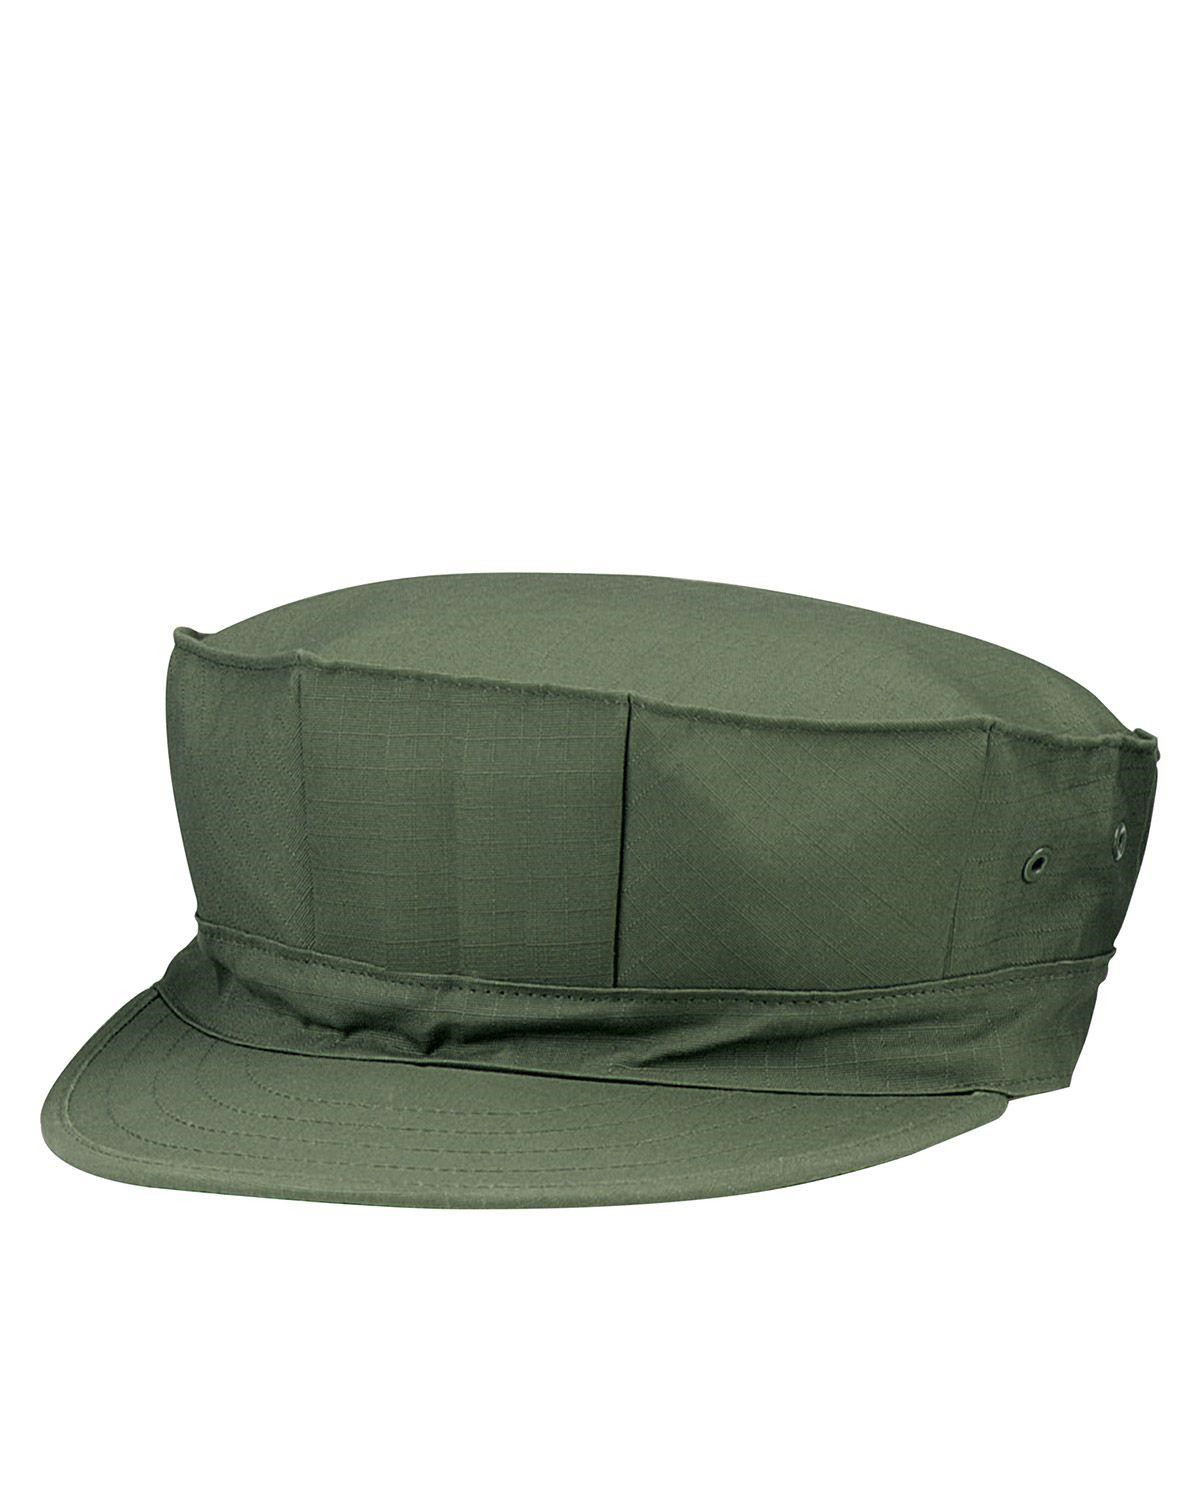 Rothco US Marine Corps Cap - Poly/Bomuld (Oliven, XL)